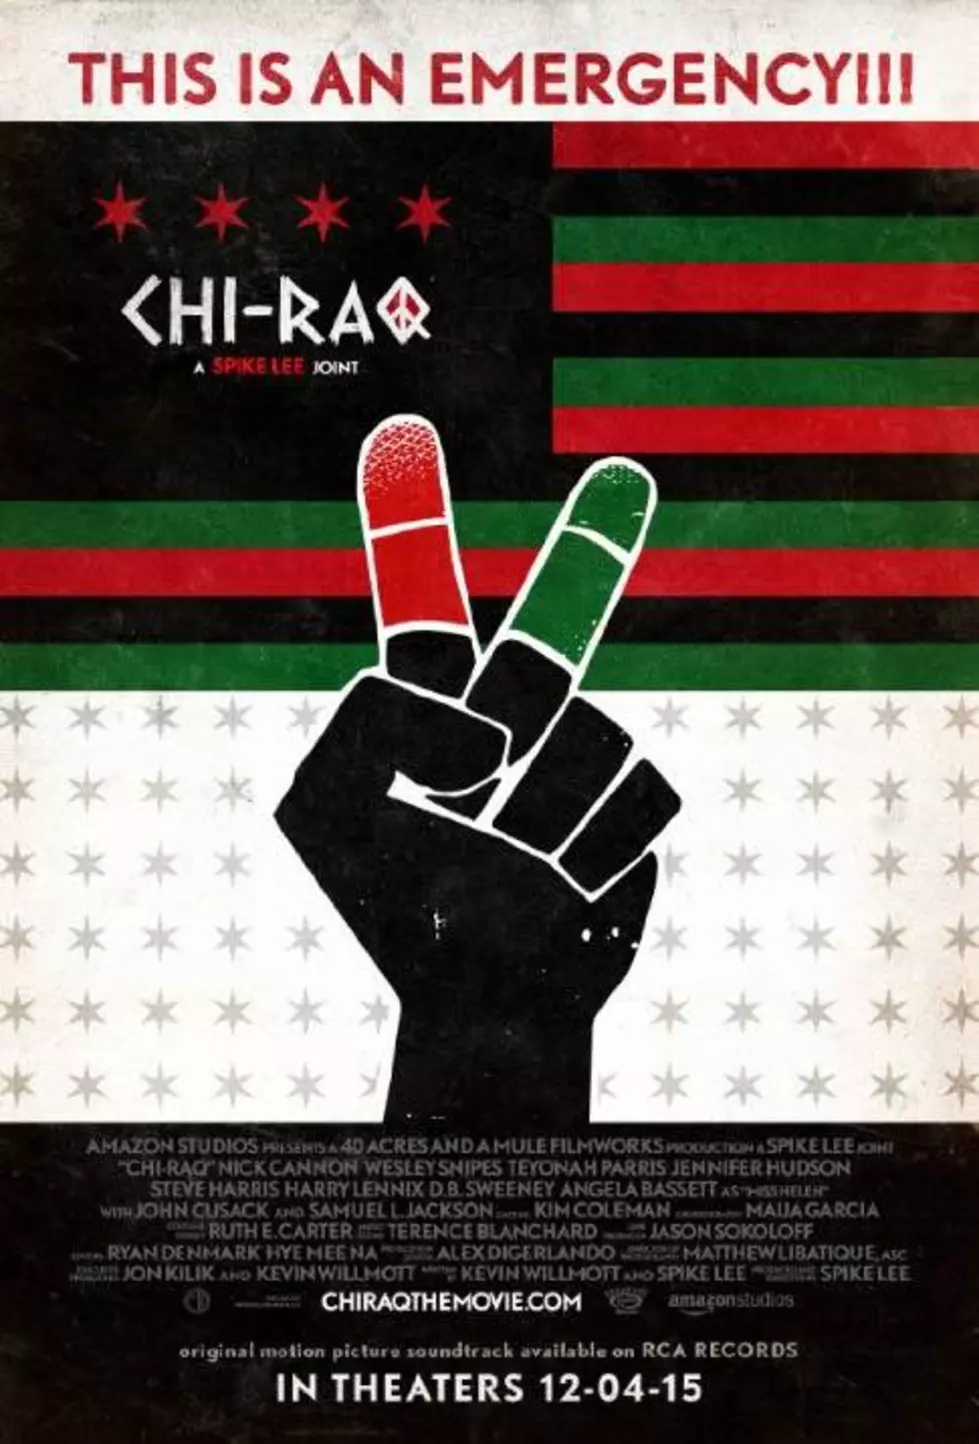 Watch the Trailer for Spike Lee's 'Chi-Raq'